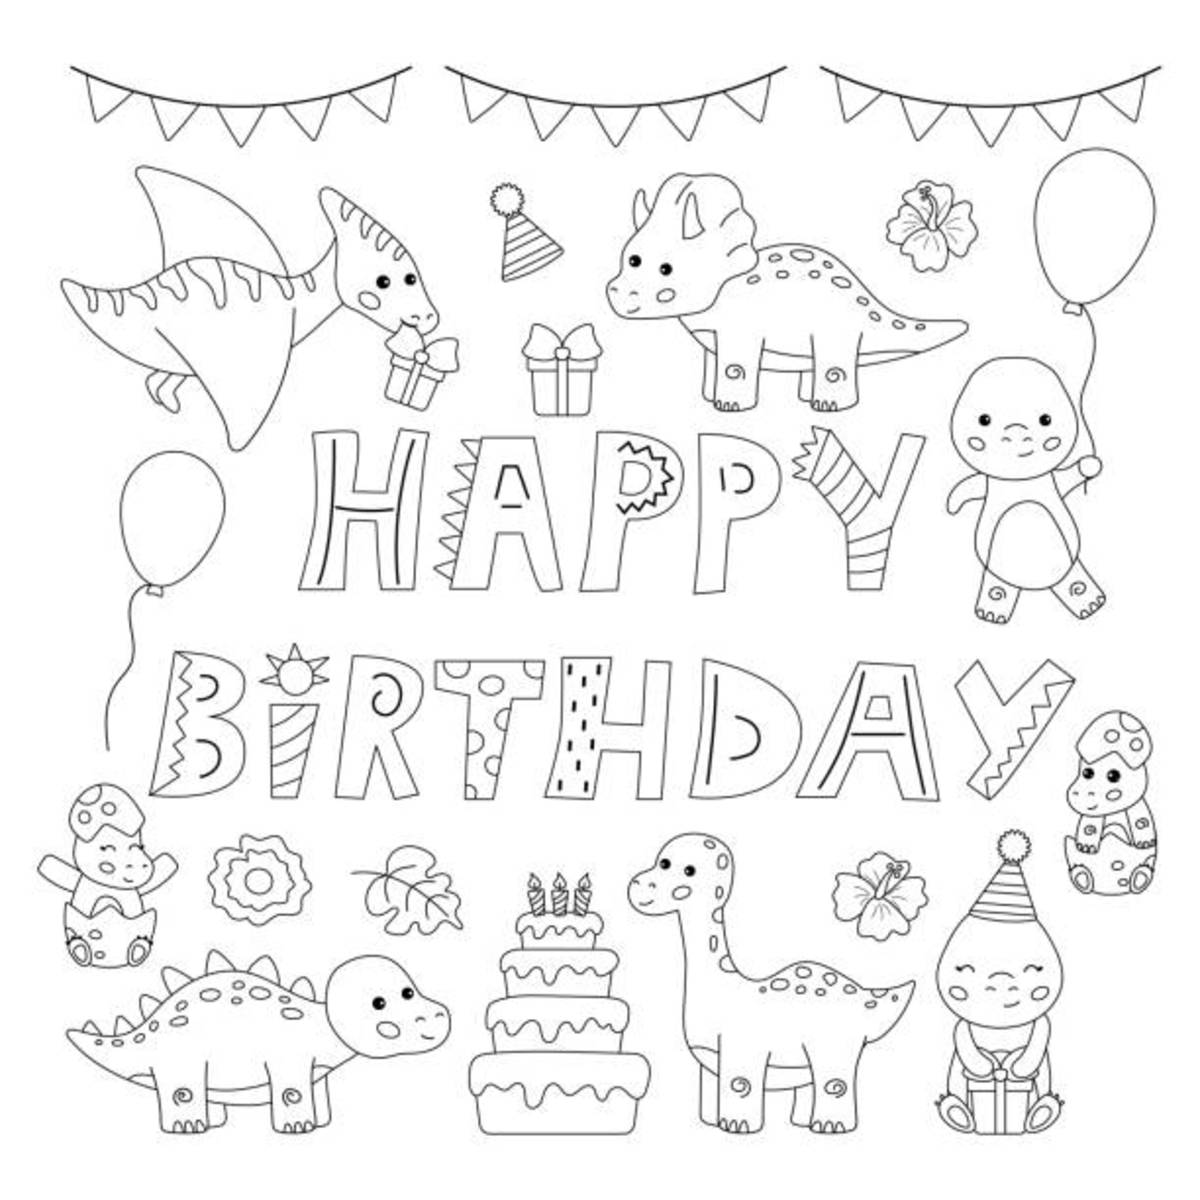 Printable birthday cards to color